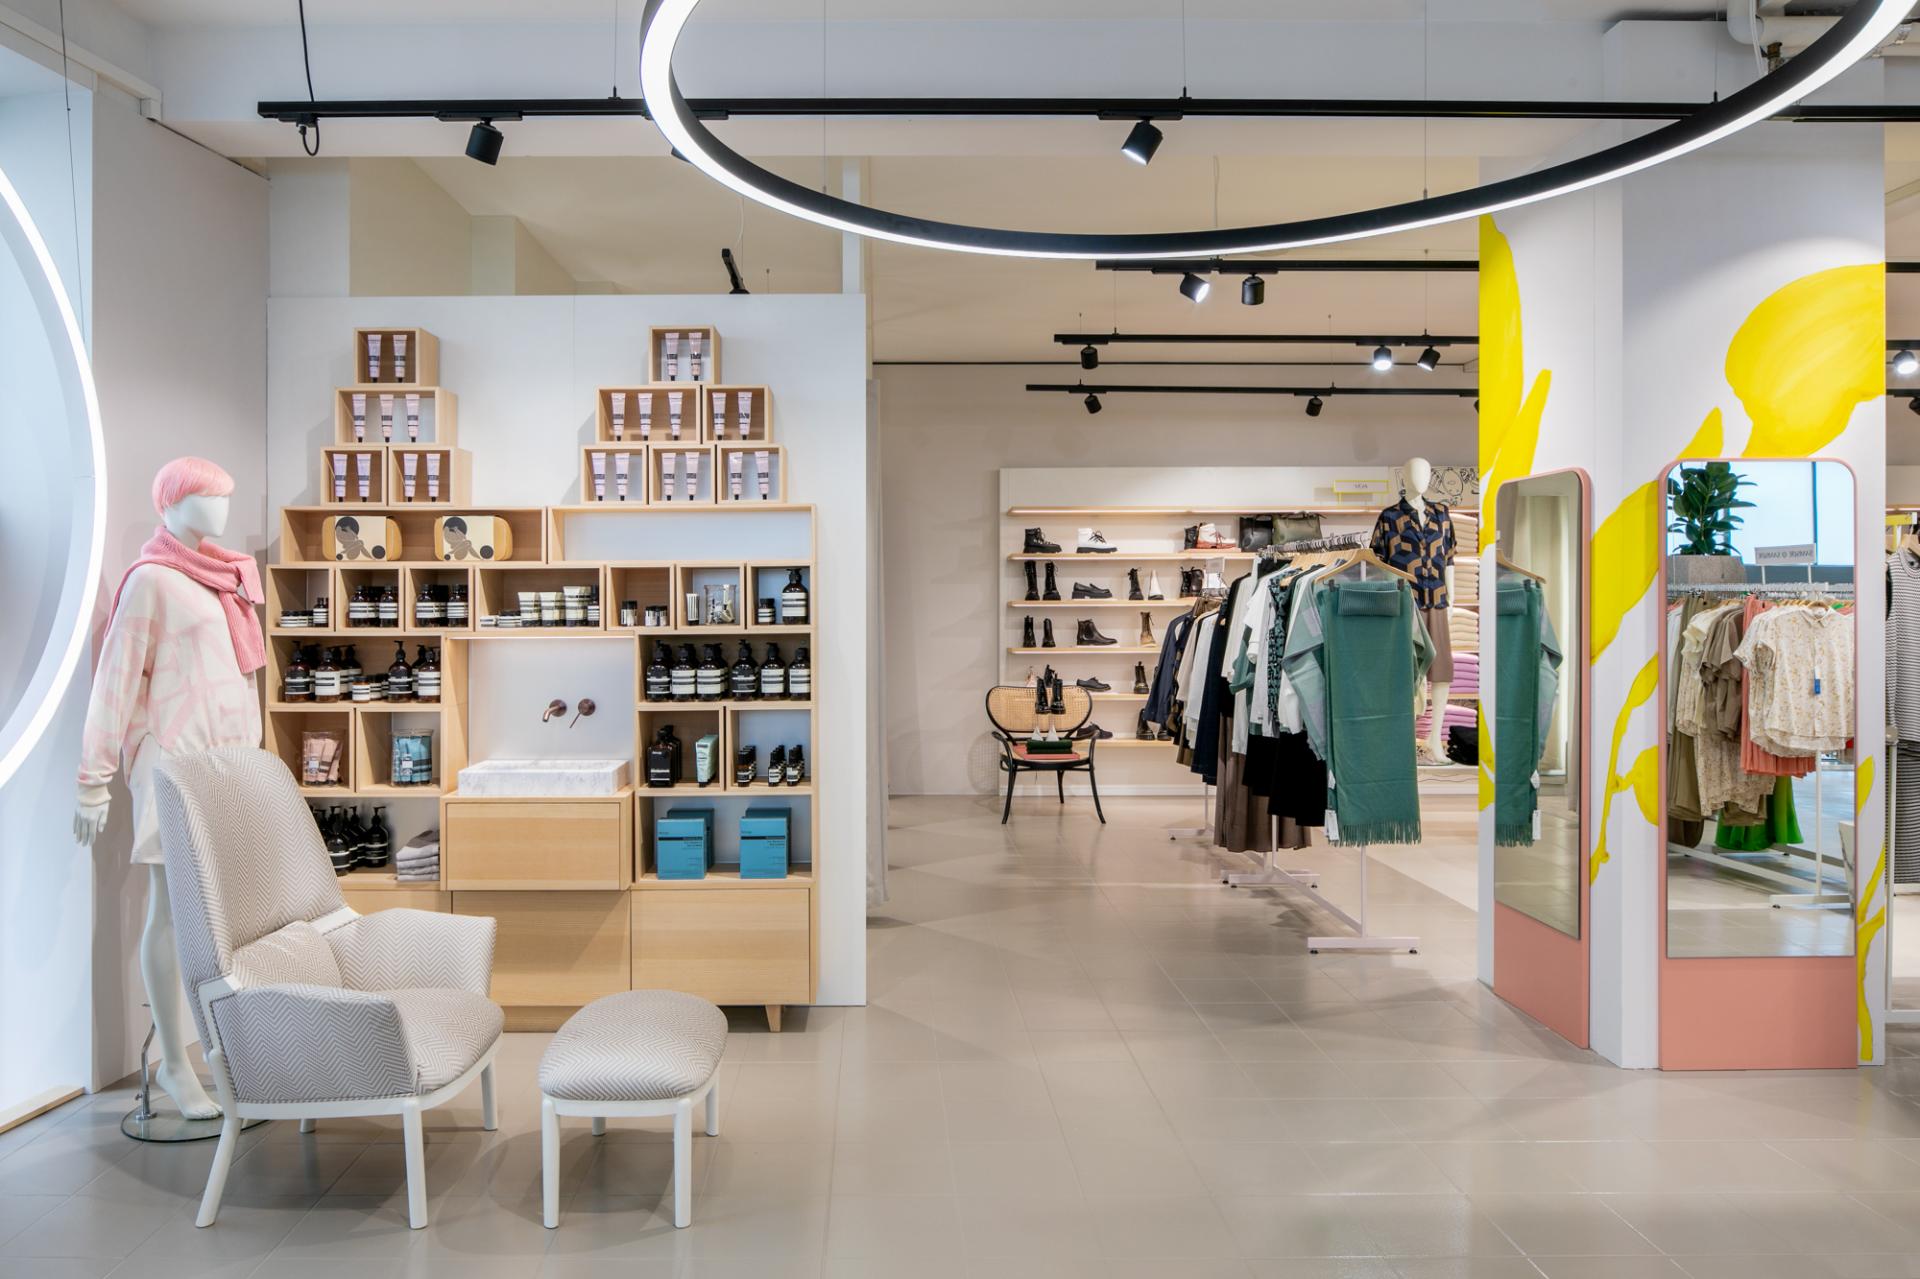 MUSE Design Awards | Retails, Shops, Department Stores & Mall Weber ...